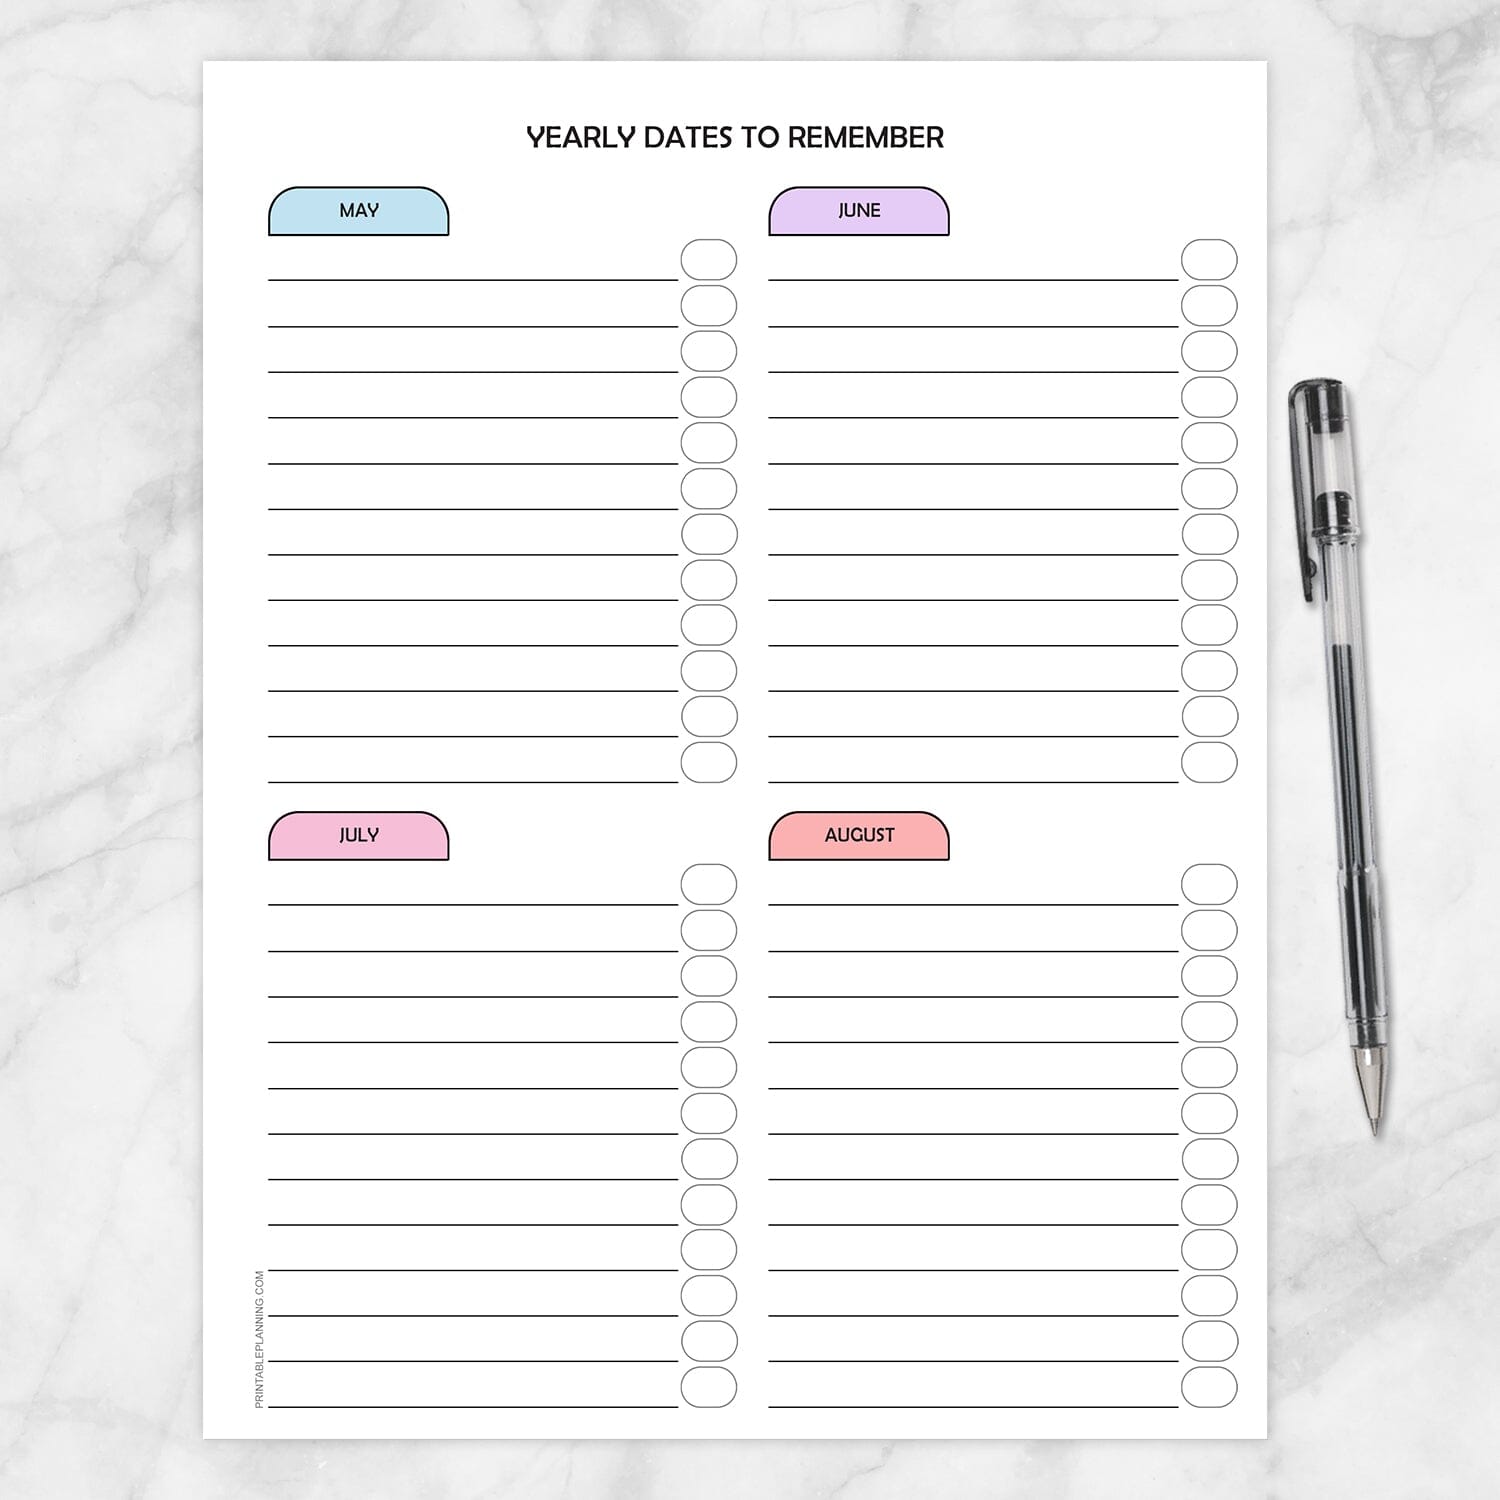 Printable Yearly Dates to Remember (page 2 of 3) at Printable Planning.